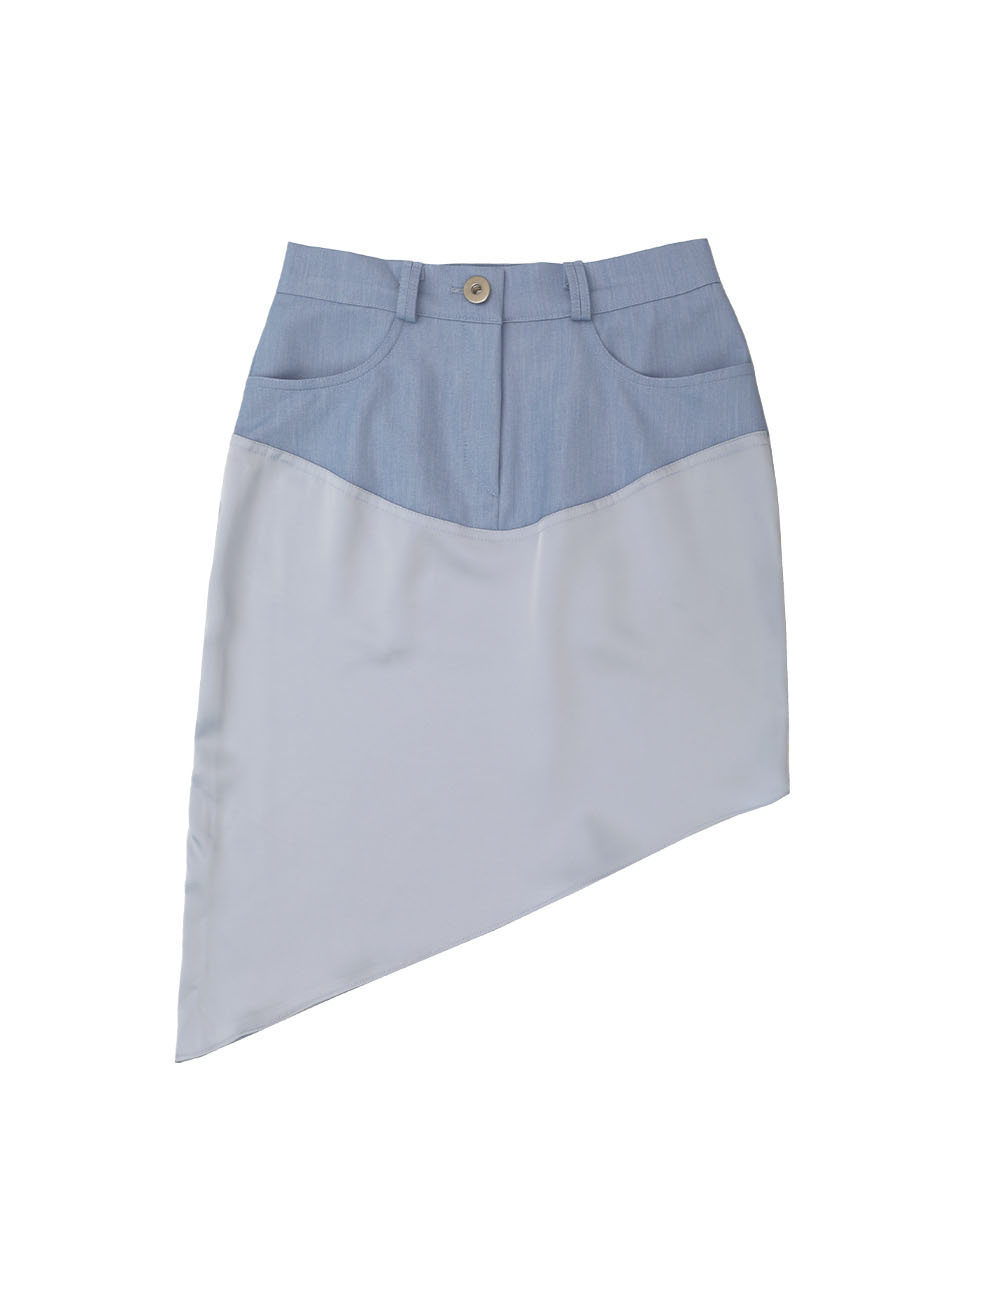 OFFICIAL COLORING SKIRT(BLUE)